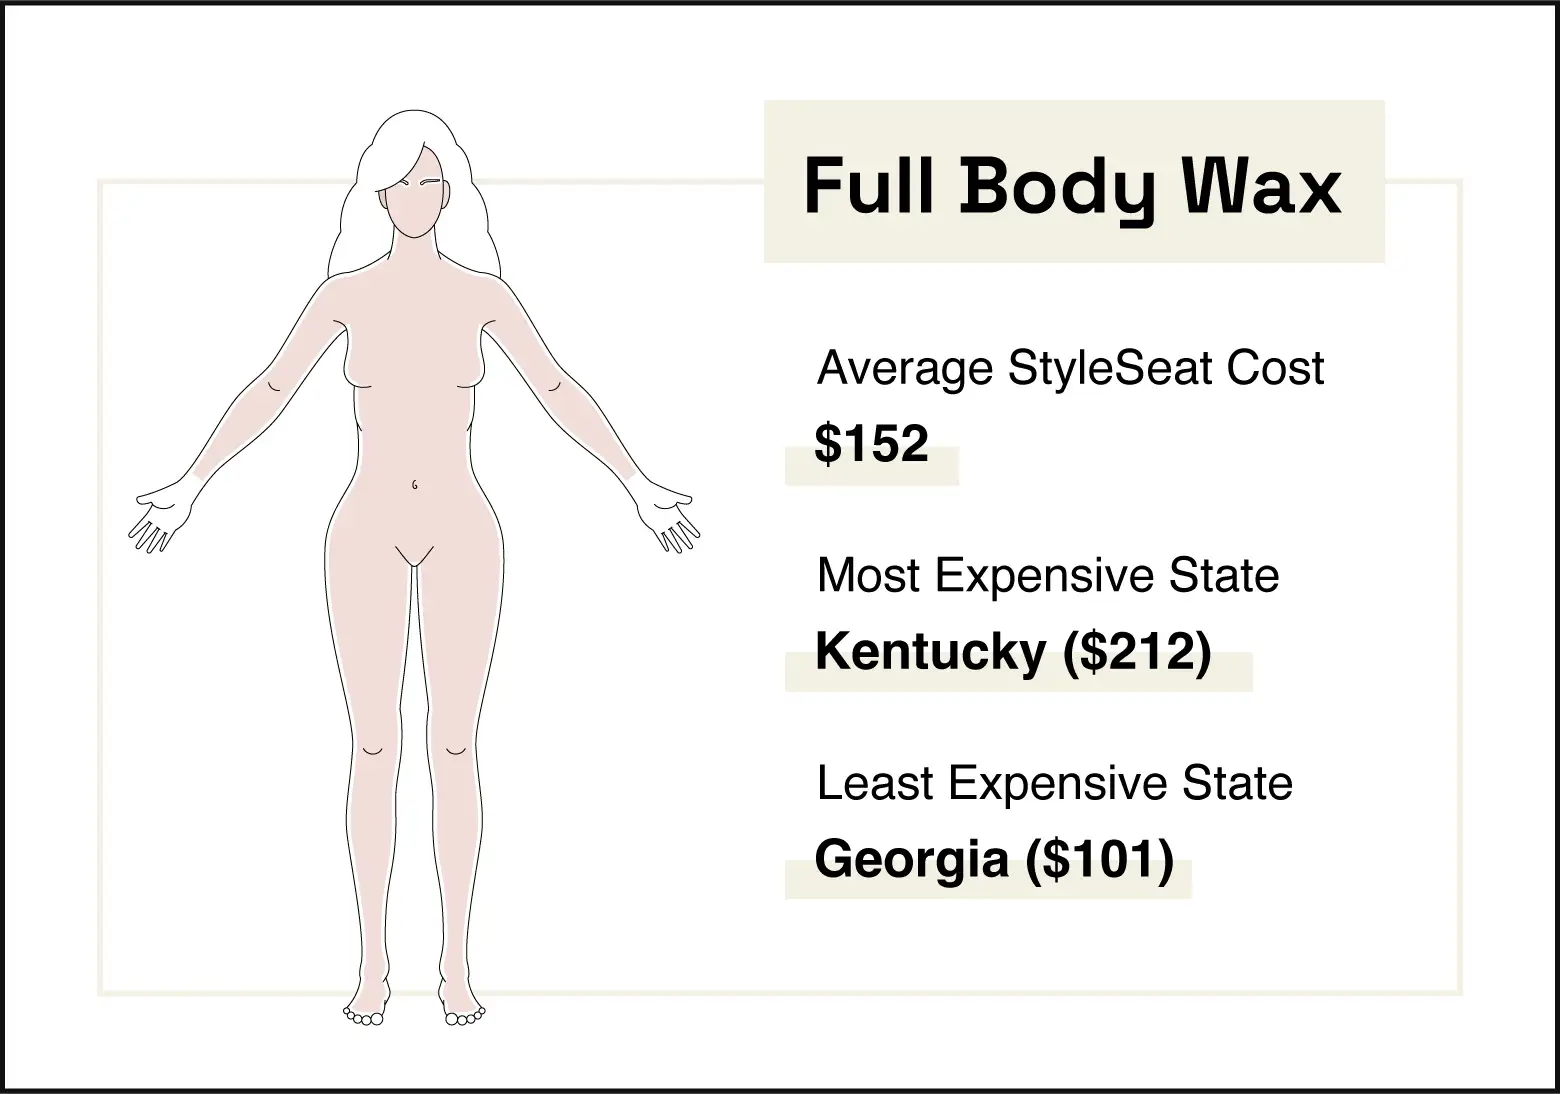 Image shows area where a full body wax occurs. The average bikini wax on StyleSeat costs $152.